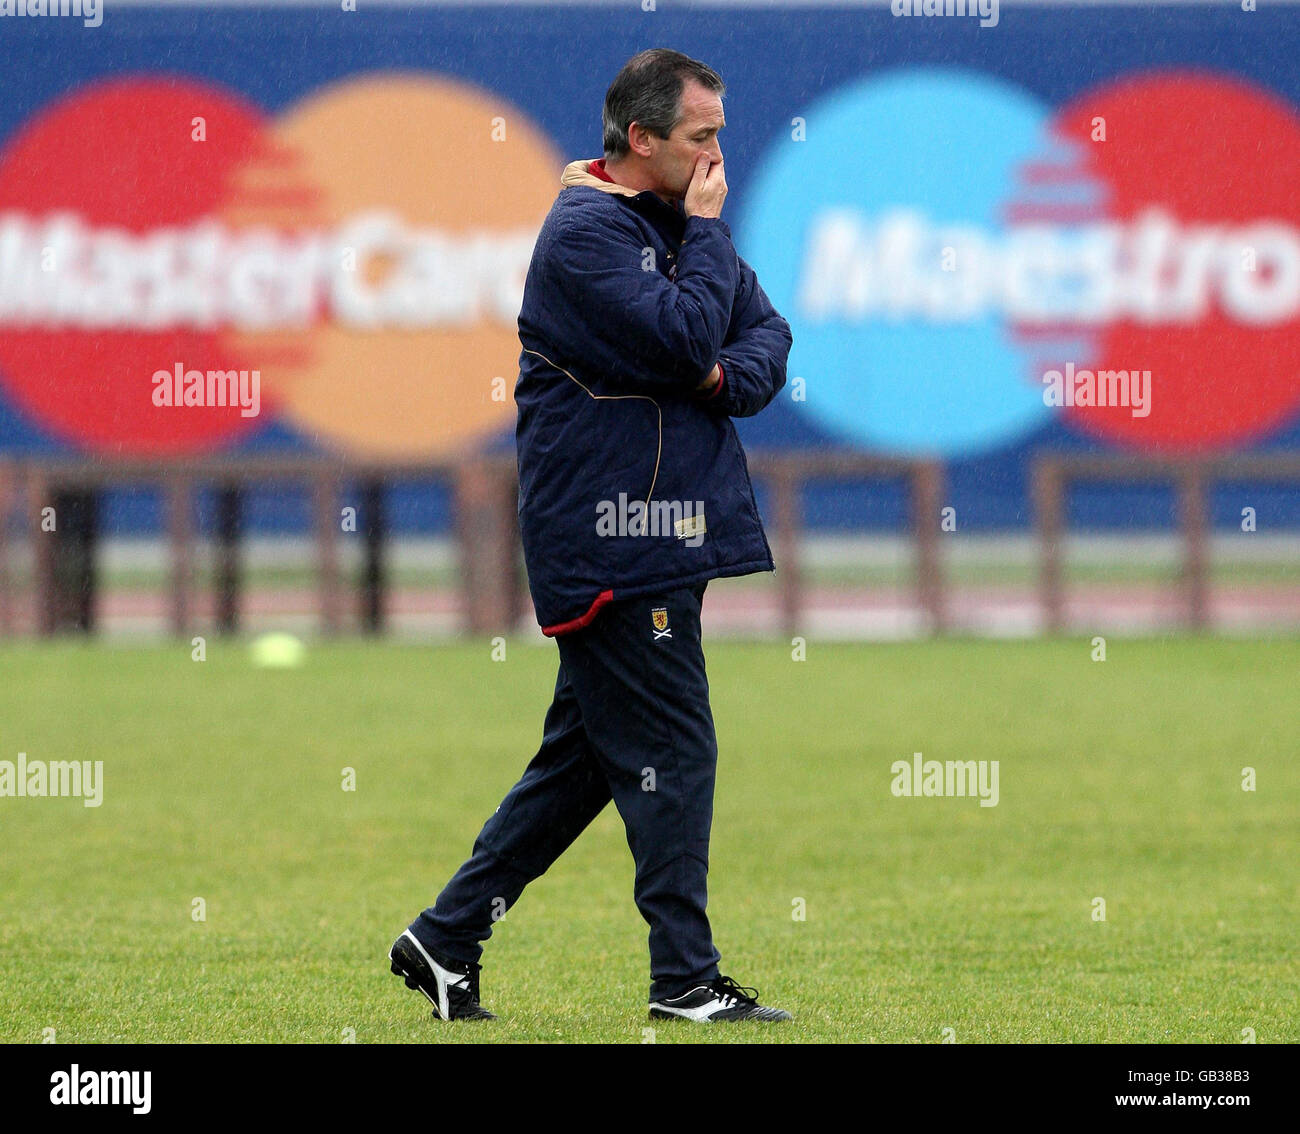 Soccer - FIFA World Cup 2010 - Qualifying Round - Group Nine - Scotland Training Session - Laugardalsvollur Stadium. Scotland's manager George Burley during the training session at the Laugardalsvollur Stadium, Reykjavik. Stock Photo